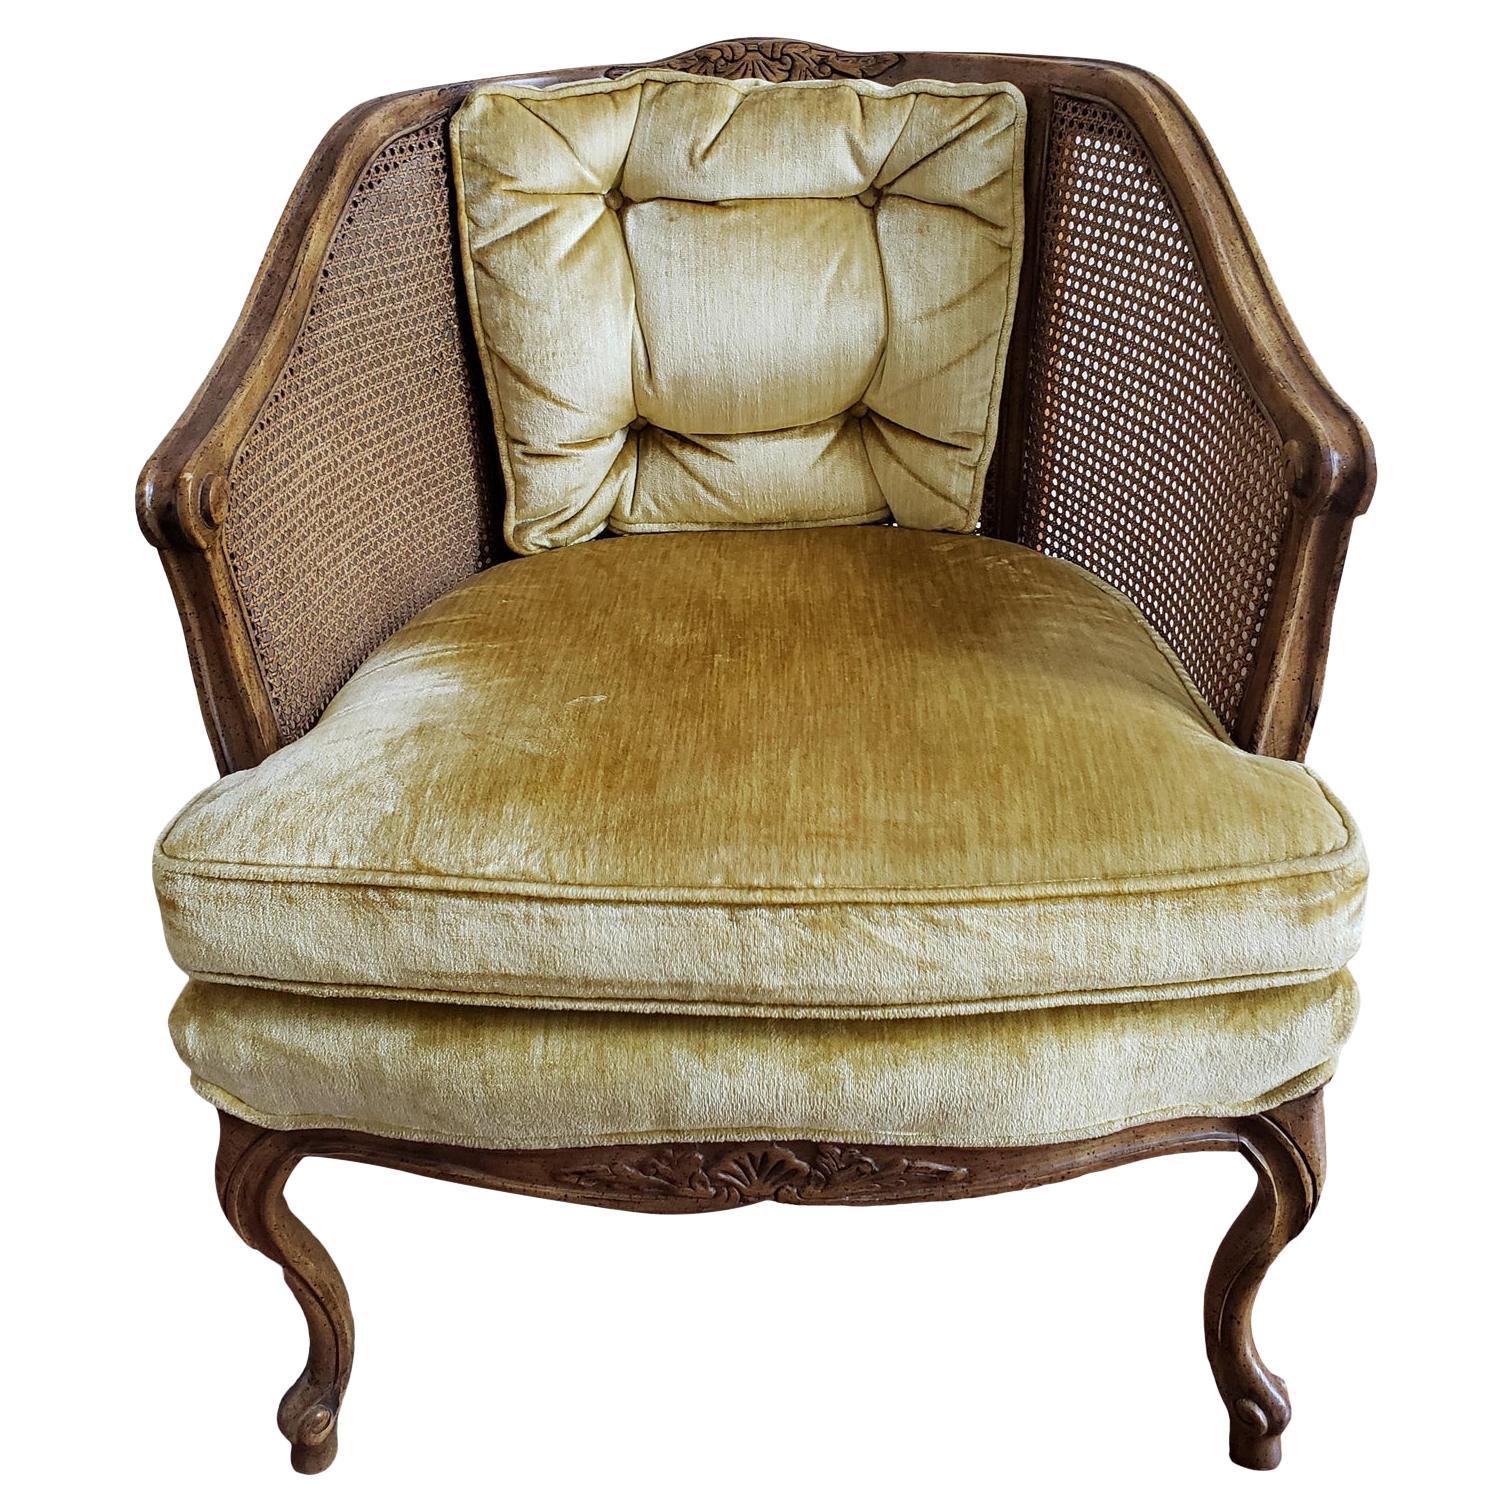 French Bergere Walnut Caned and Upholstered Chair in Mustard Velvet